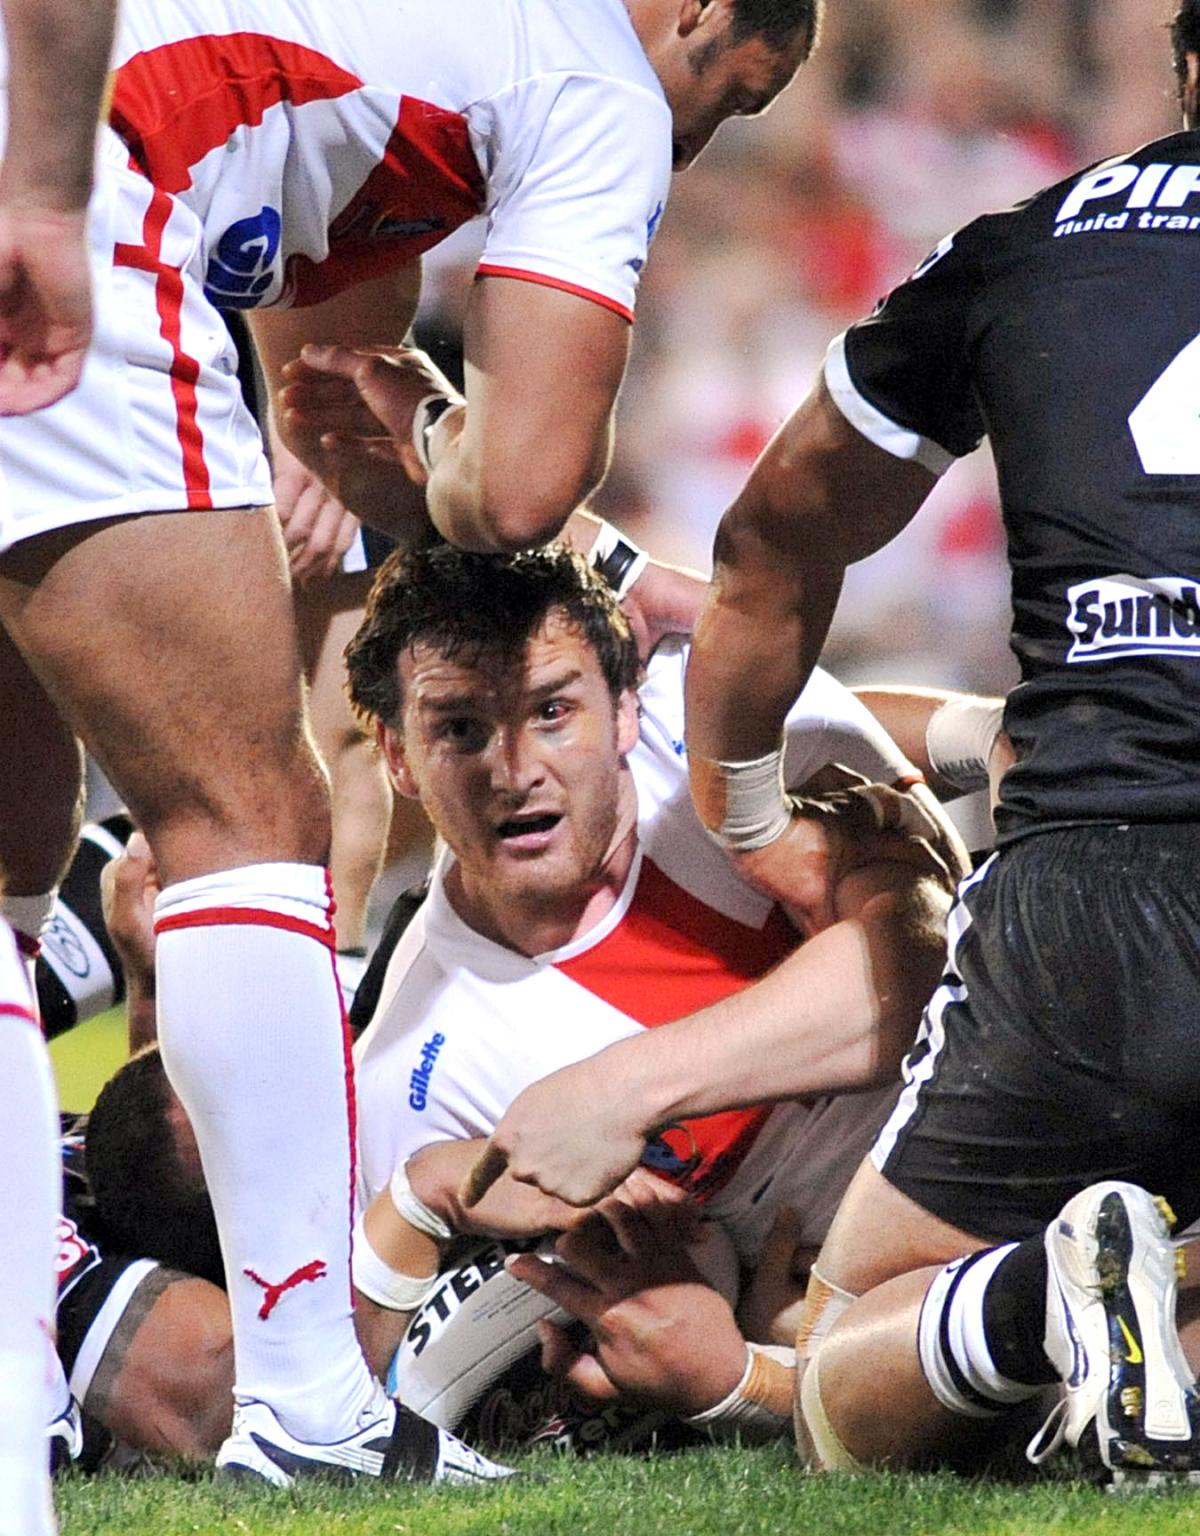 Martin Gleeson, tackled by New Zealand in the 2008 World Cup